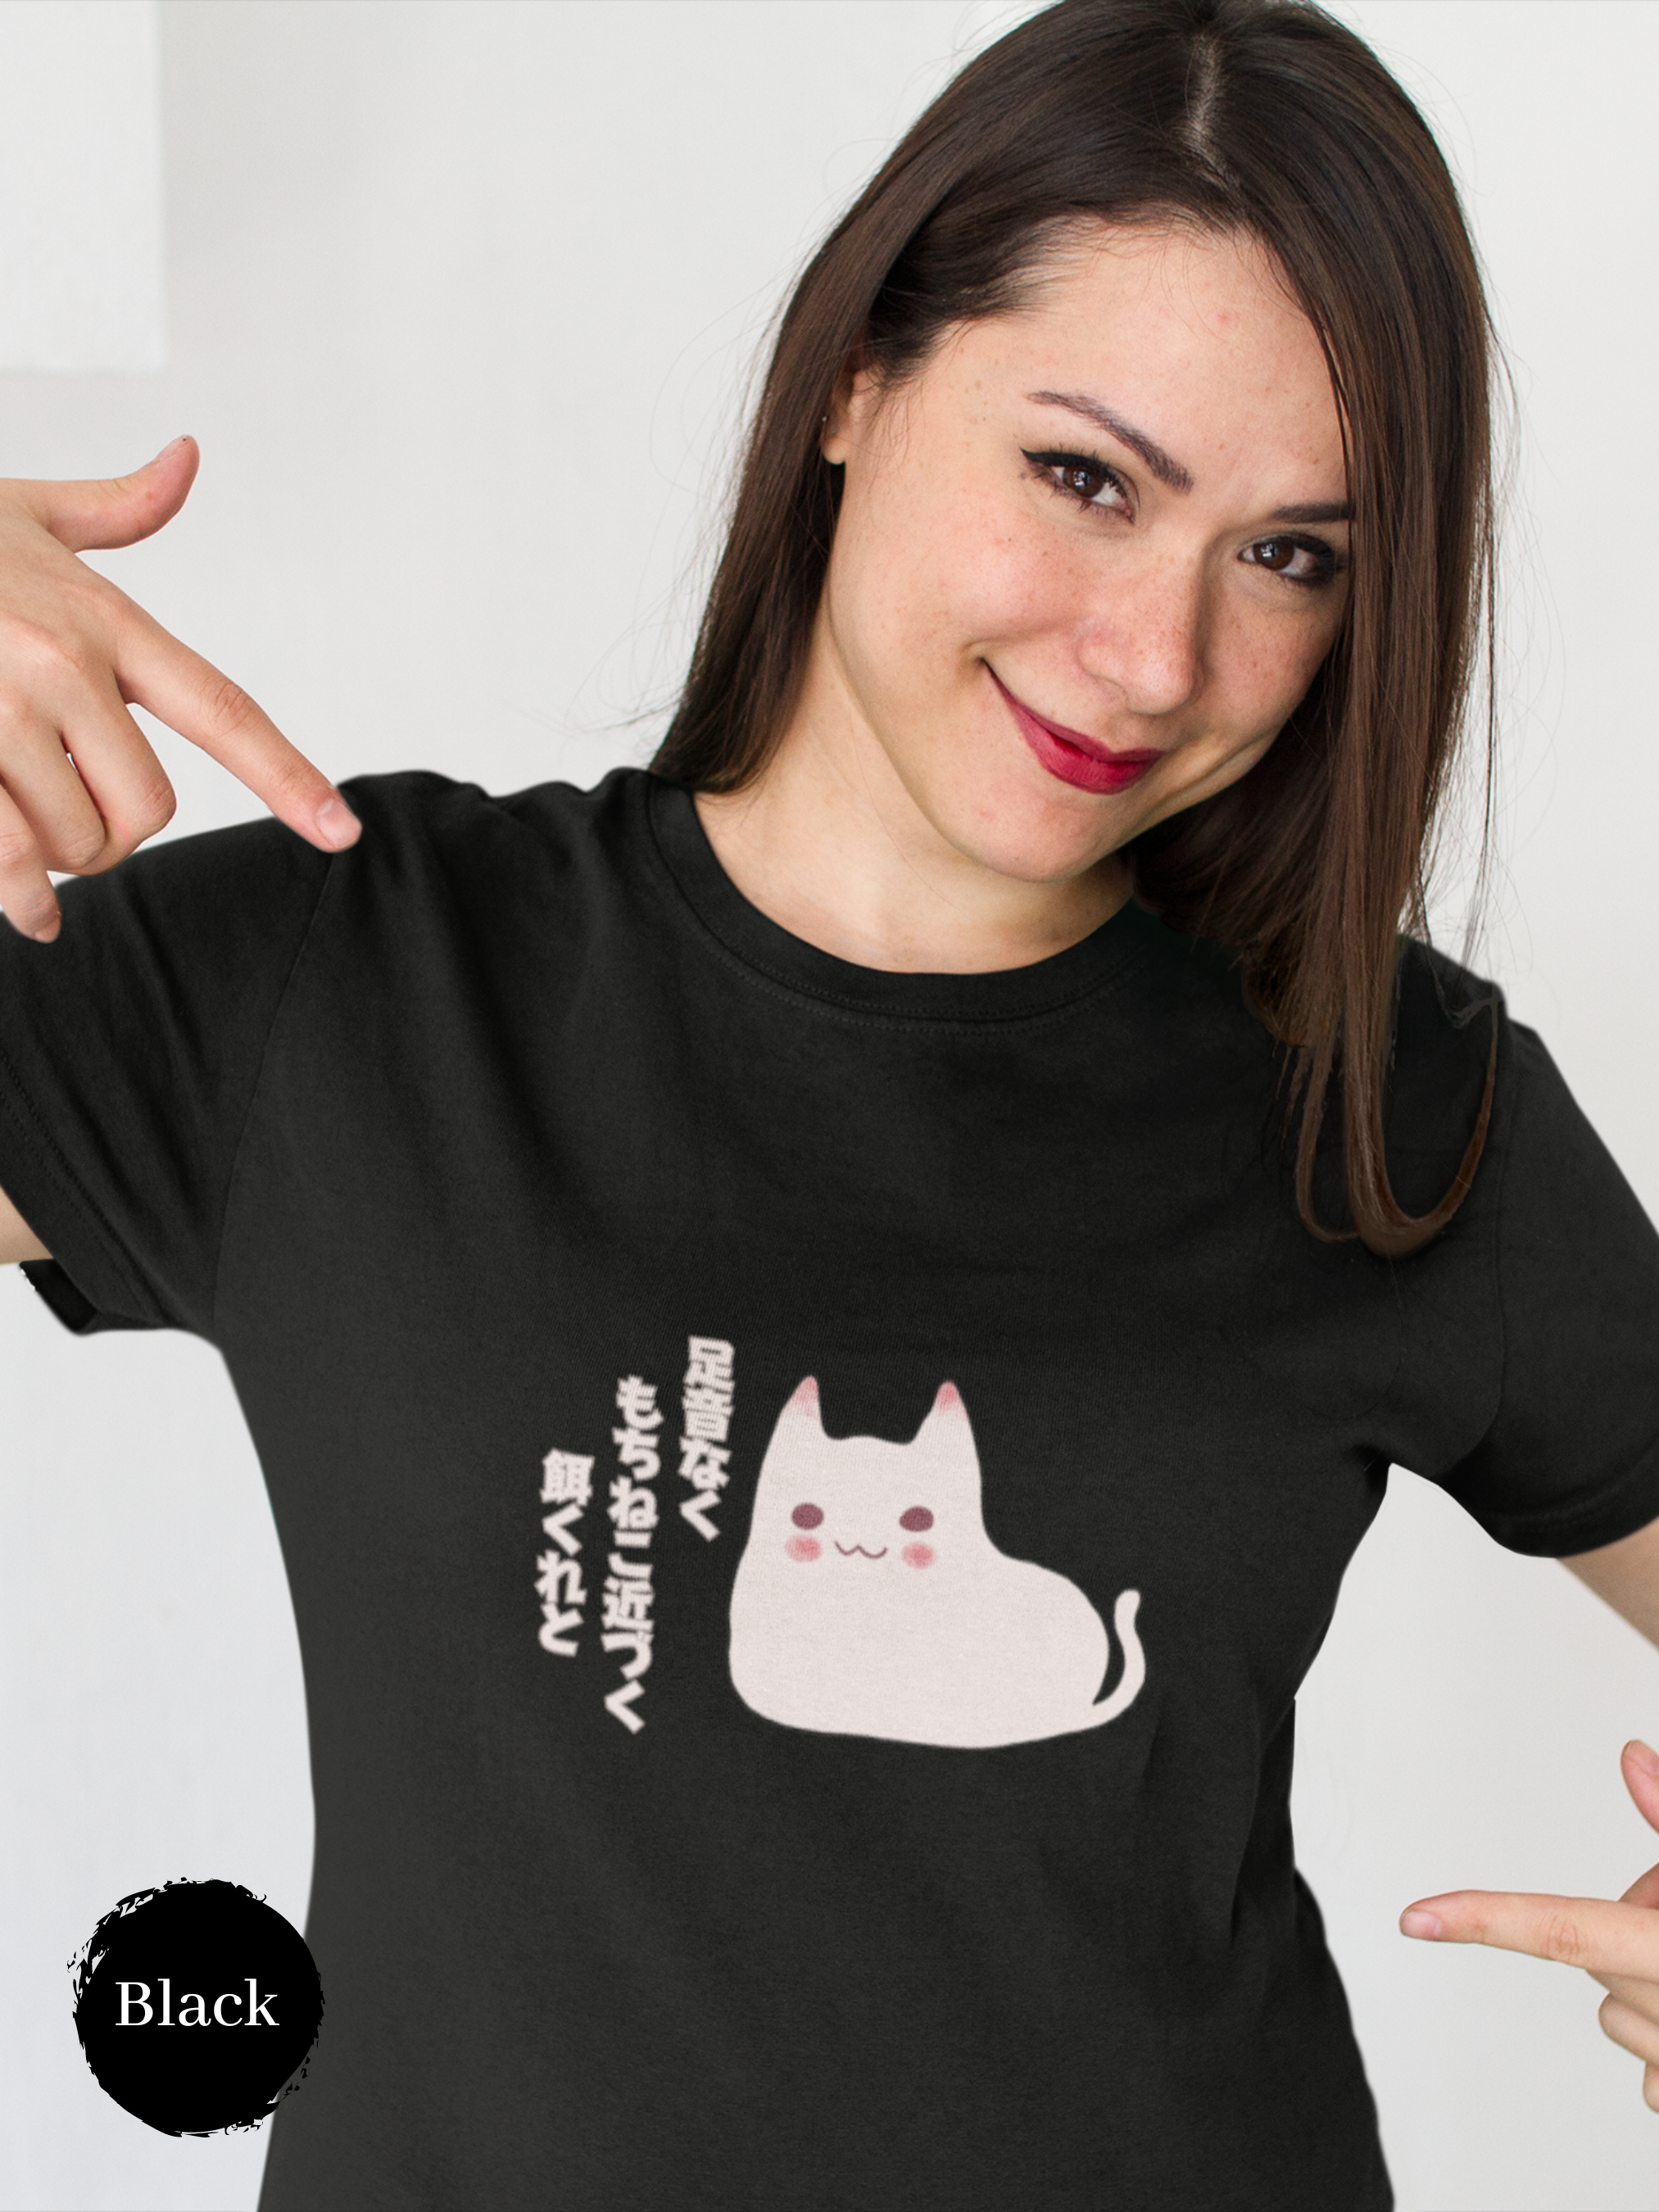 Mochi Cat T-shirt: Adorable Japanese Foodie Japanese Haiku Shirt with Cat Art Featuring the Sweet Mochi Cat